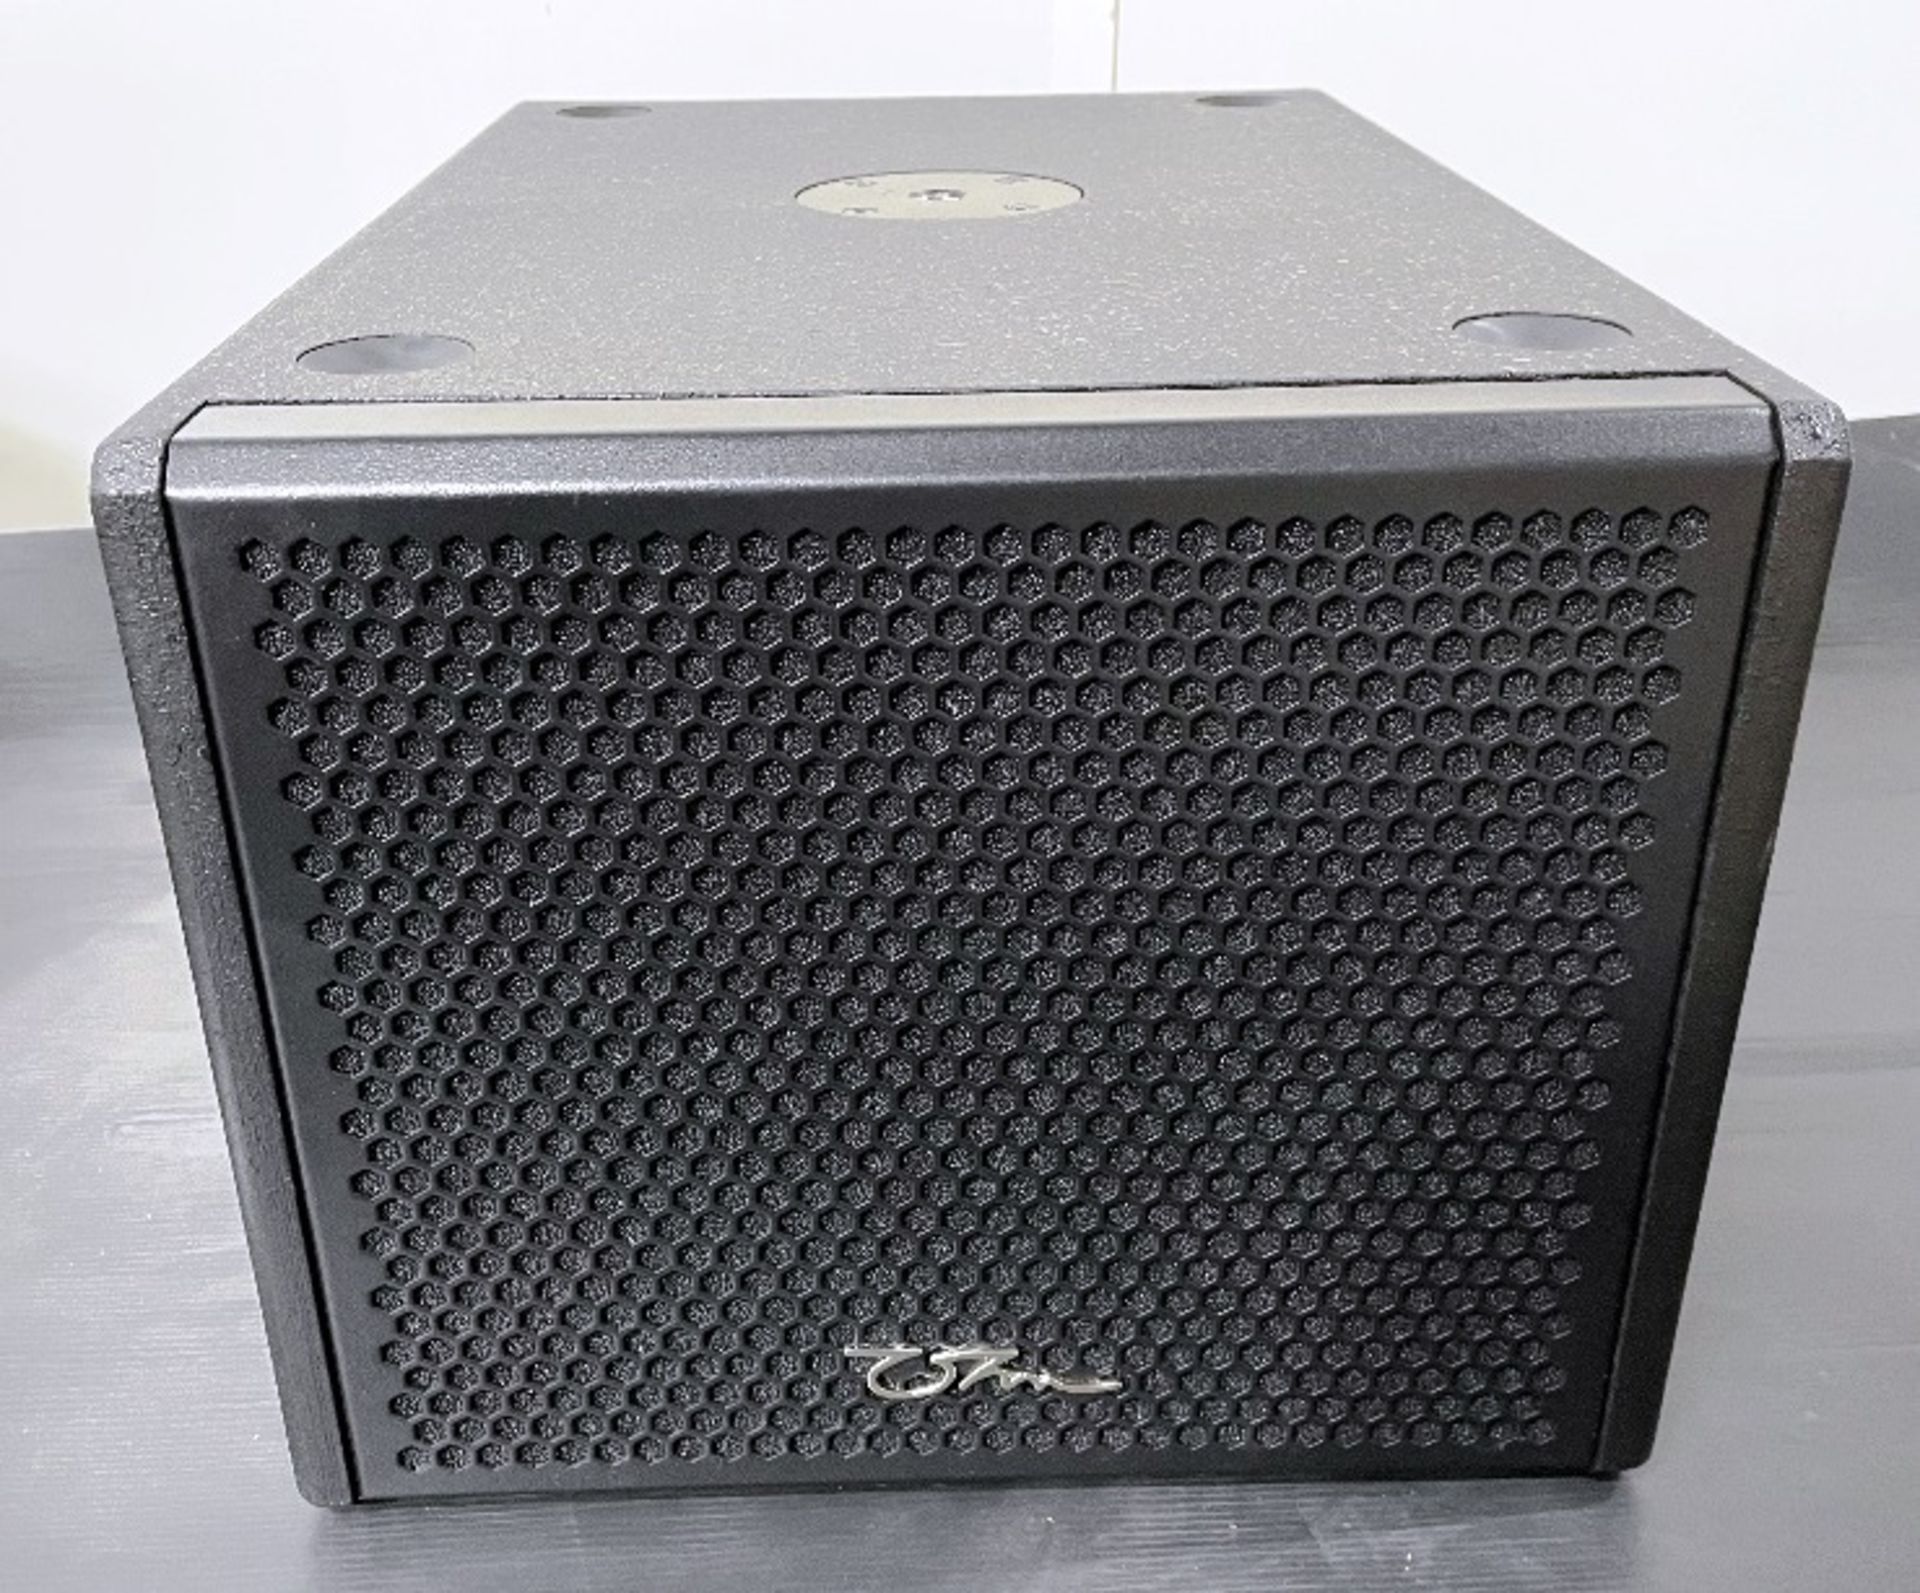 Ohm BRS-12-2 Subwoofer w/ Protective Carry Case